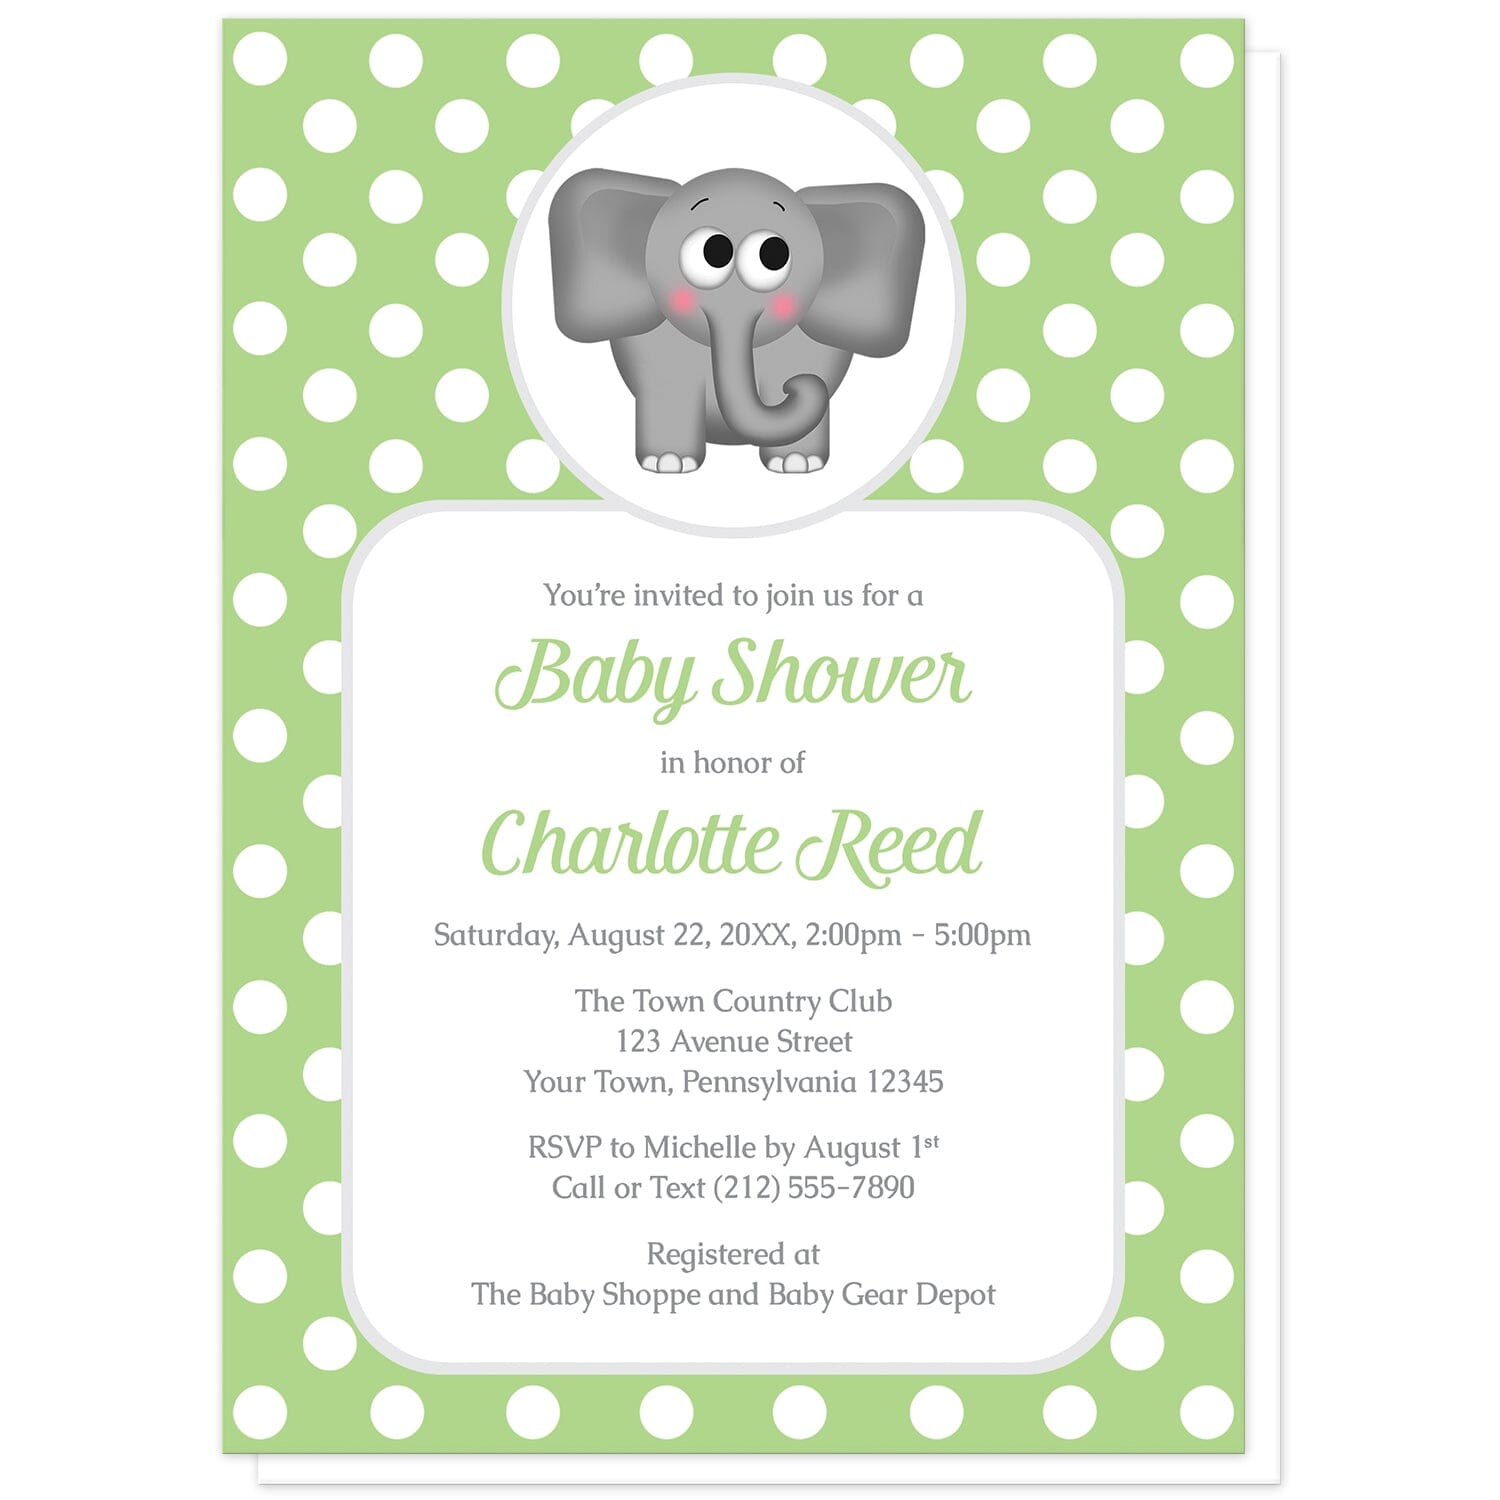 Cute Elephant Green Polka Dot Baby Shower Invitations at Artistically Invited. Cute elephant green polka dot baby shower invitations that are illustrated with an affectionate and adorable gray elephant over a green polka dot background. Your personalized baby shower details are custom printed in green and gray over a white rectangular area over the green polka dot background.